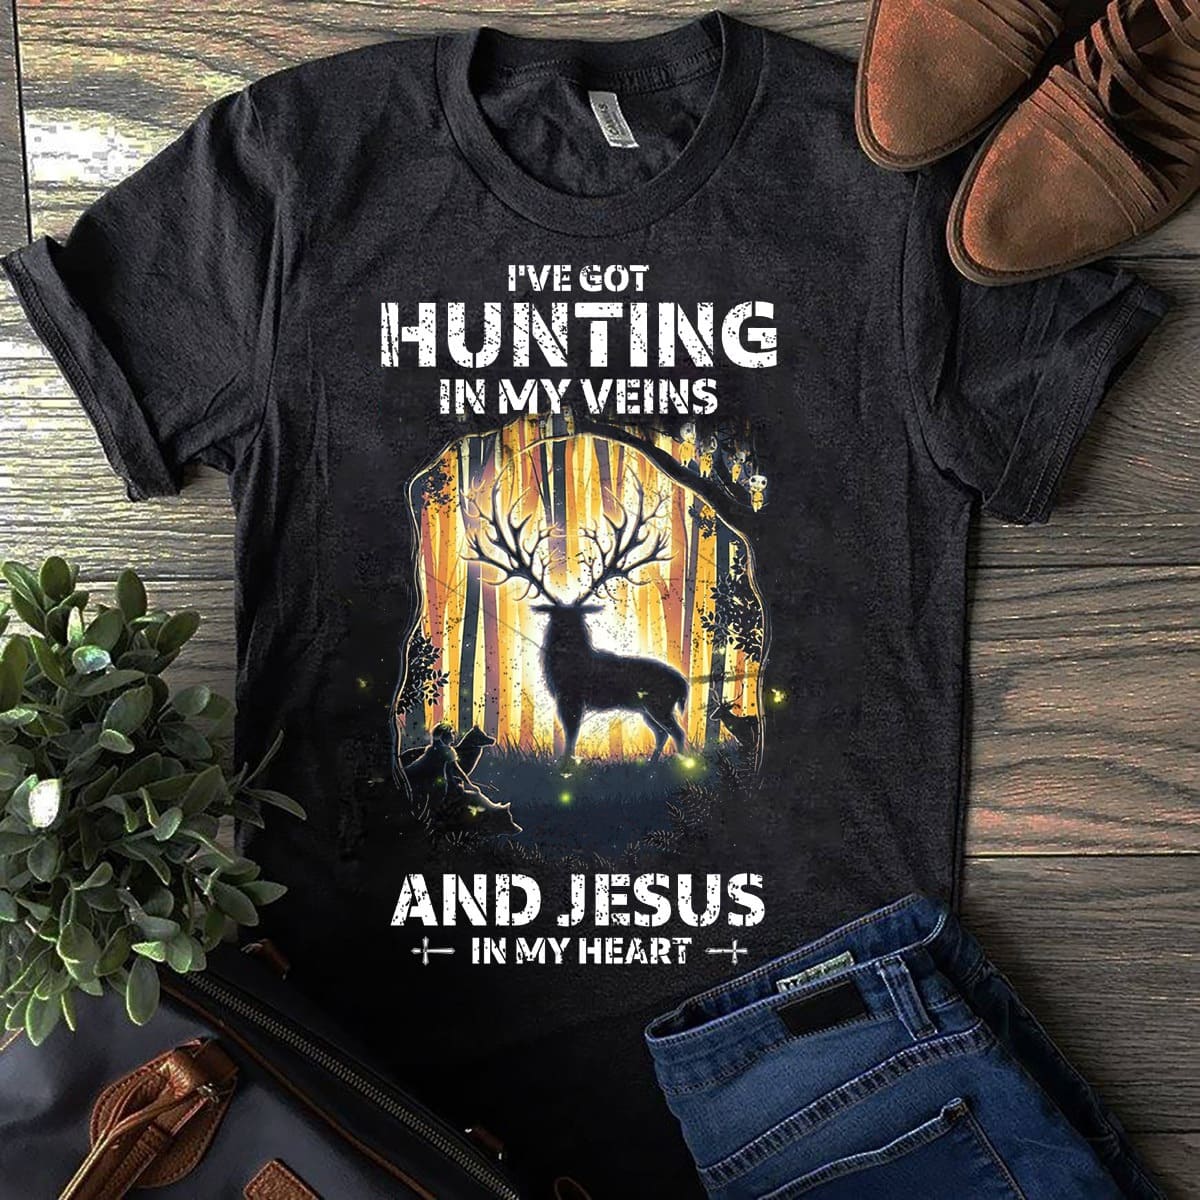 Deer Hunting - I've got hunting in my veins and jesus in my heart